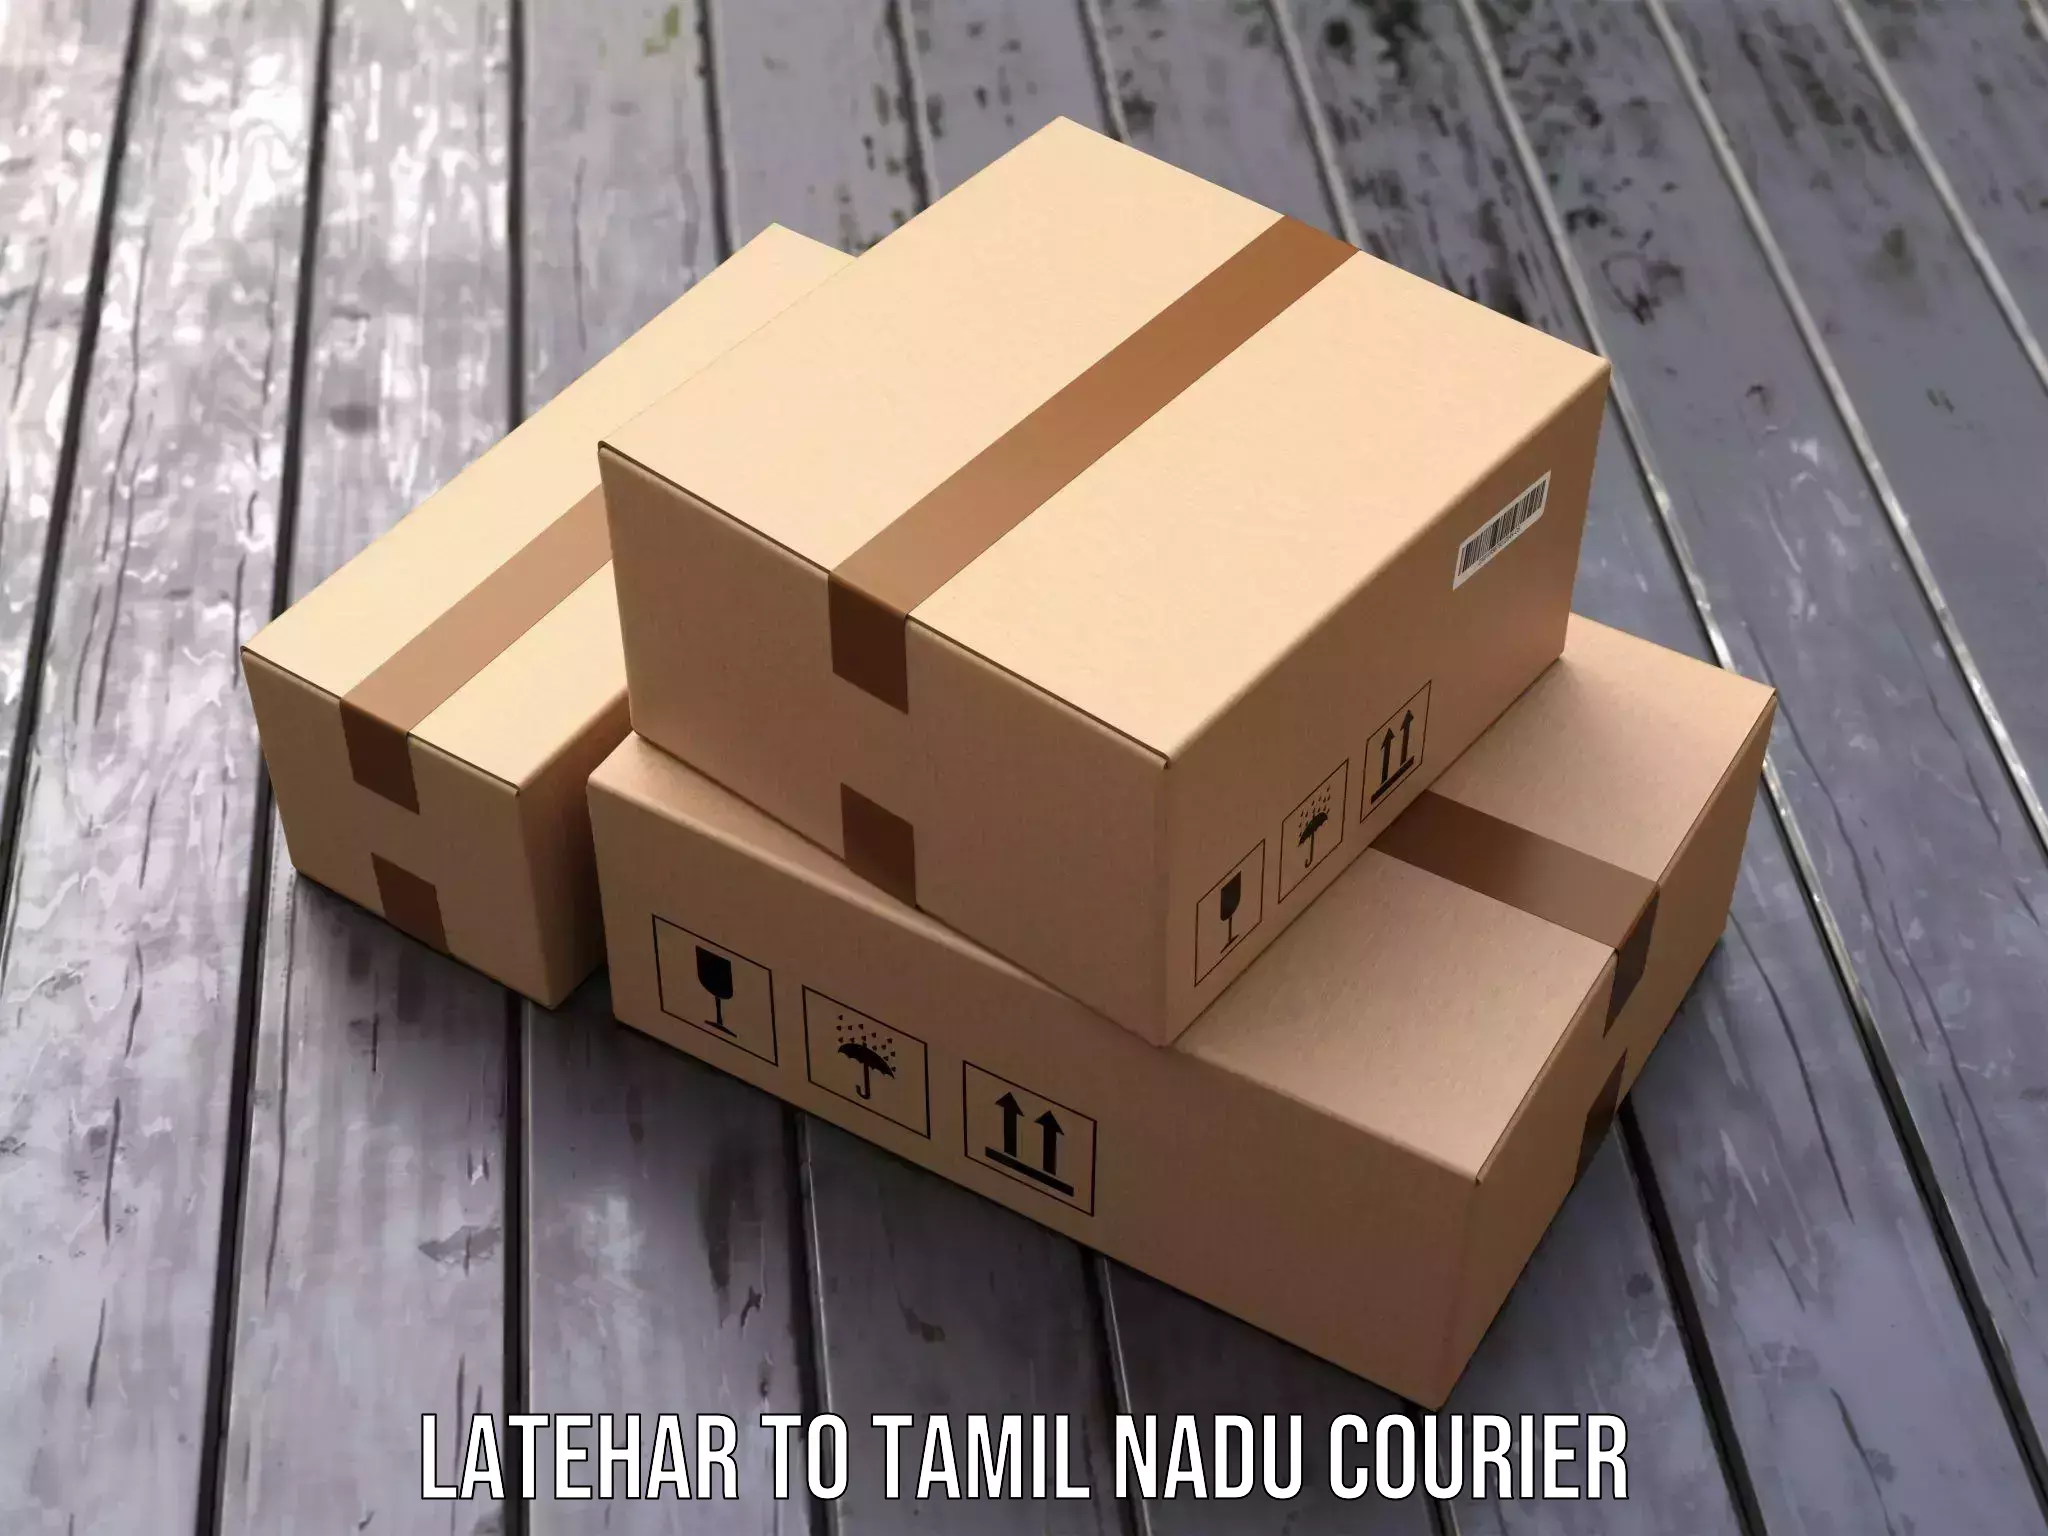 Customer-oriented courier services Latehar to Chengalpattu